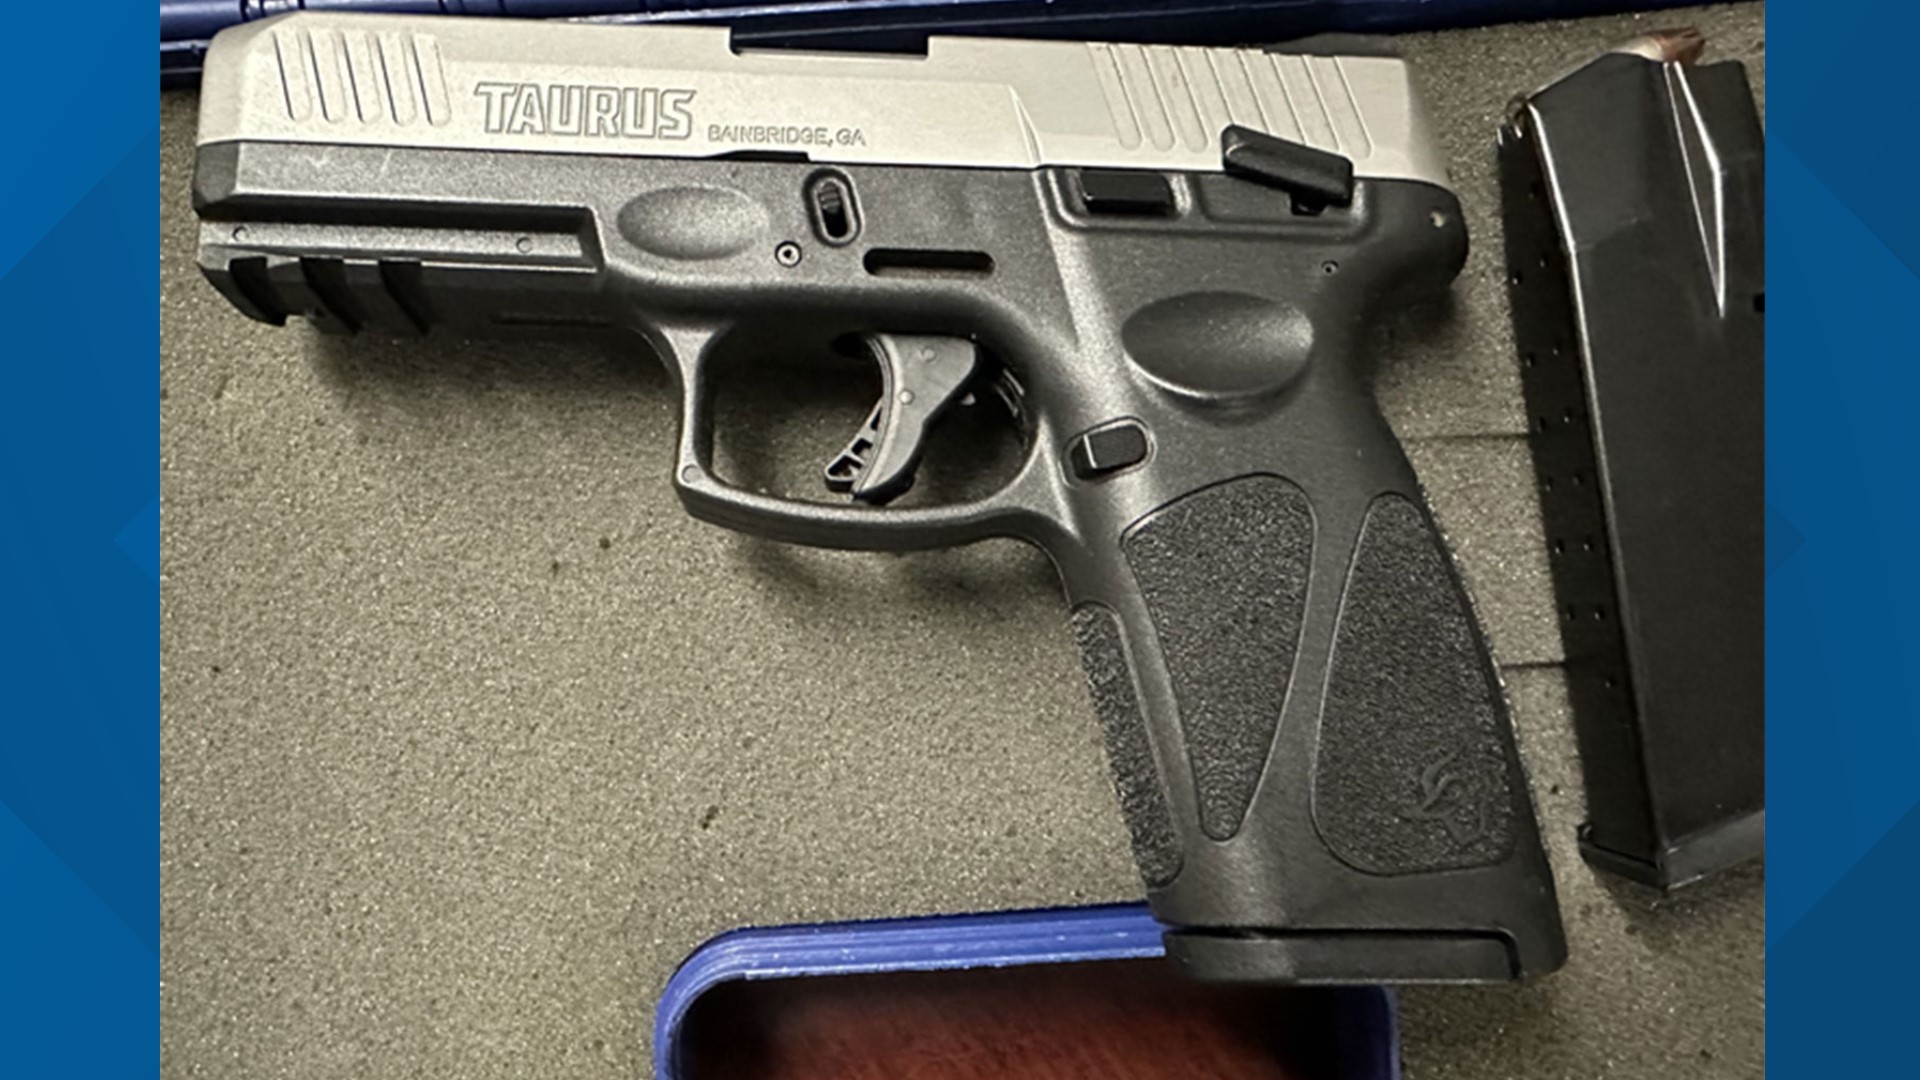 A northern Virginia man could have to pay up to $15,000 after TSA agents say he tried bringing a loaded gun onto his flight at Norfolk International Airport.